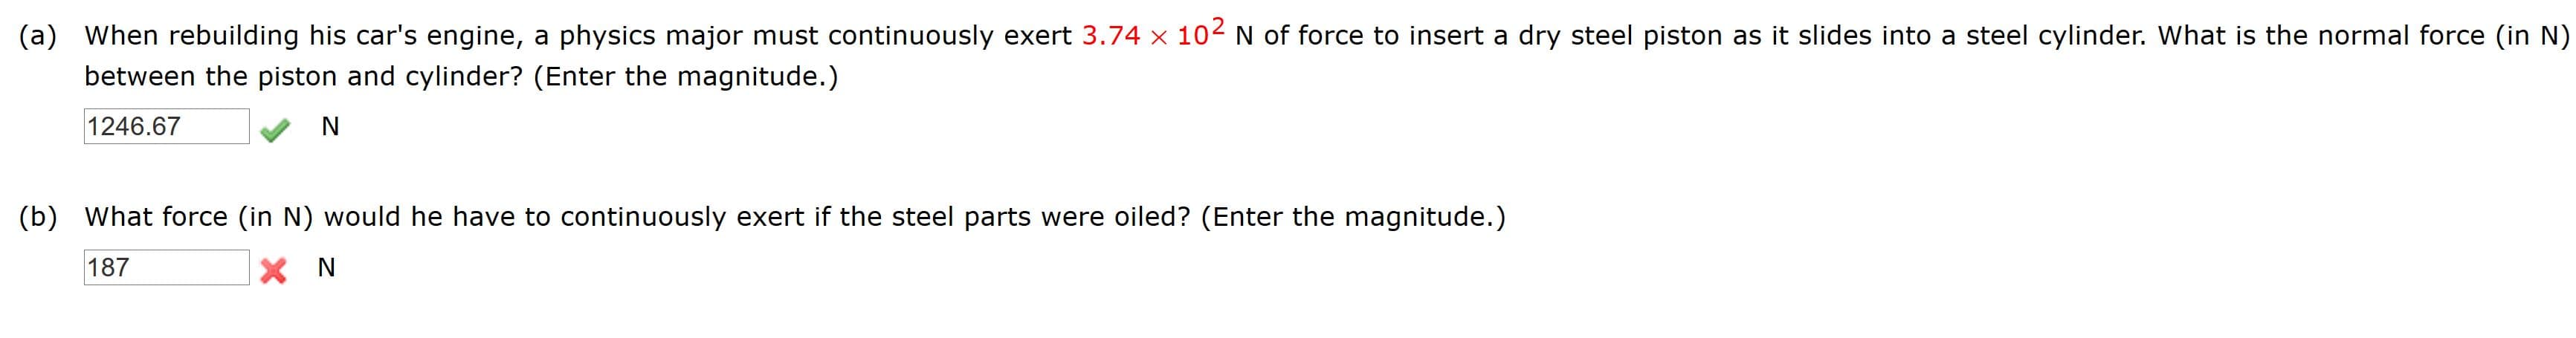 a) When rebuilding his car's engine, a physics major must continuously exert 3.74 x 102 N of force to insert a dry steel piston as it slides into a steel cylinder. What is the normal force (in N)
between the piston and cylinder? (Enter the magnitude.)
1246.67
N
b) What force (in N) would he have to continuously exert if the steel parts were oiled? (Enter the magnitude.)
187
X N
